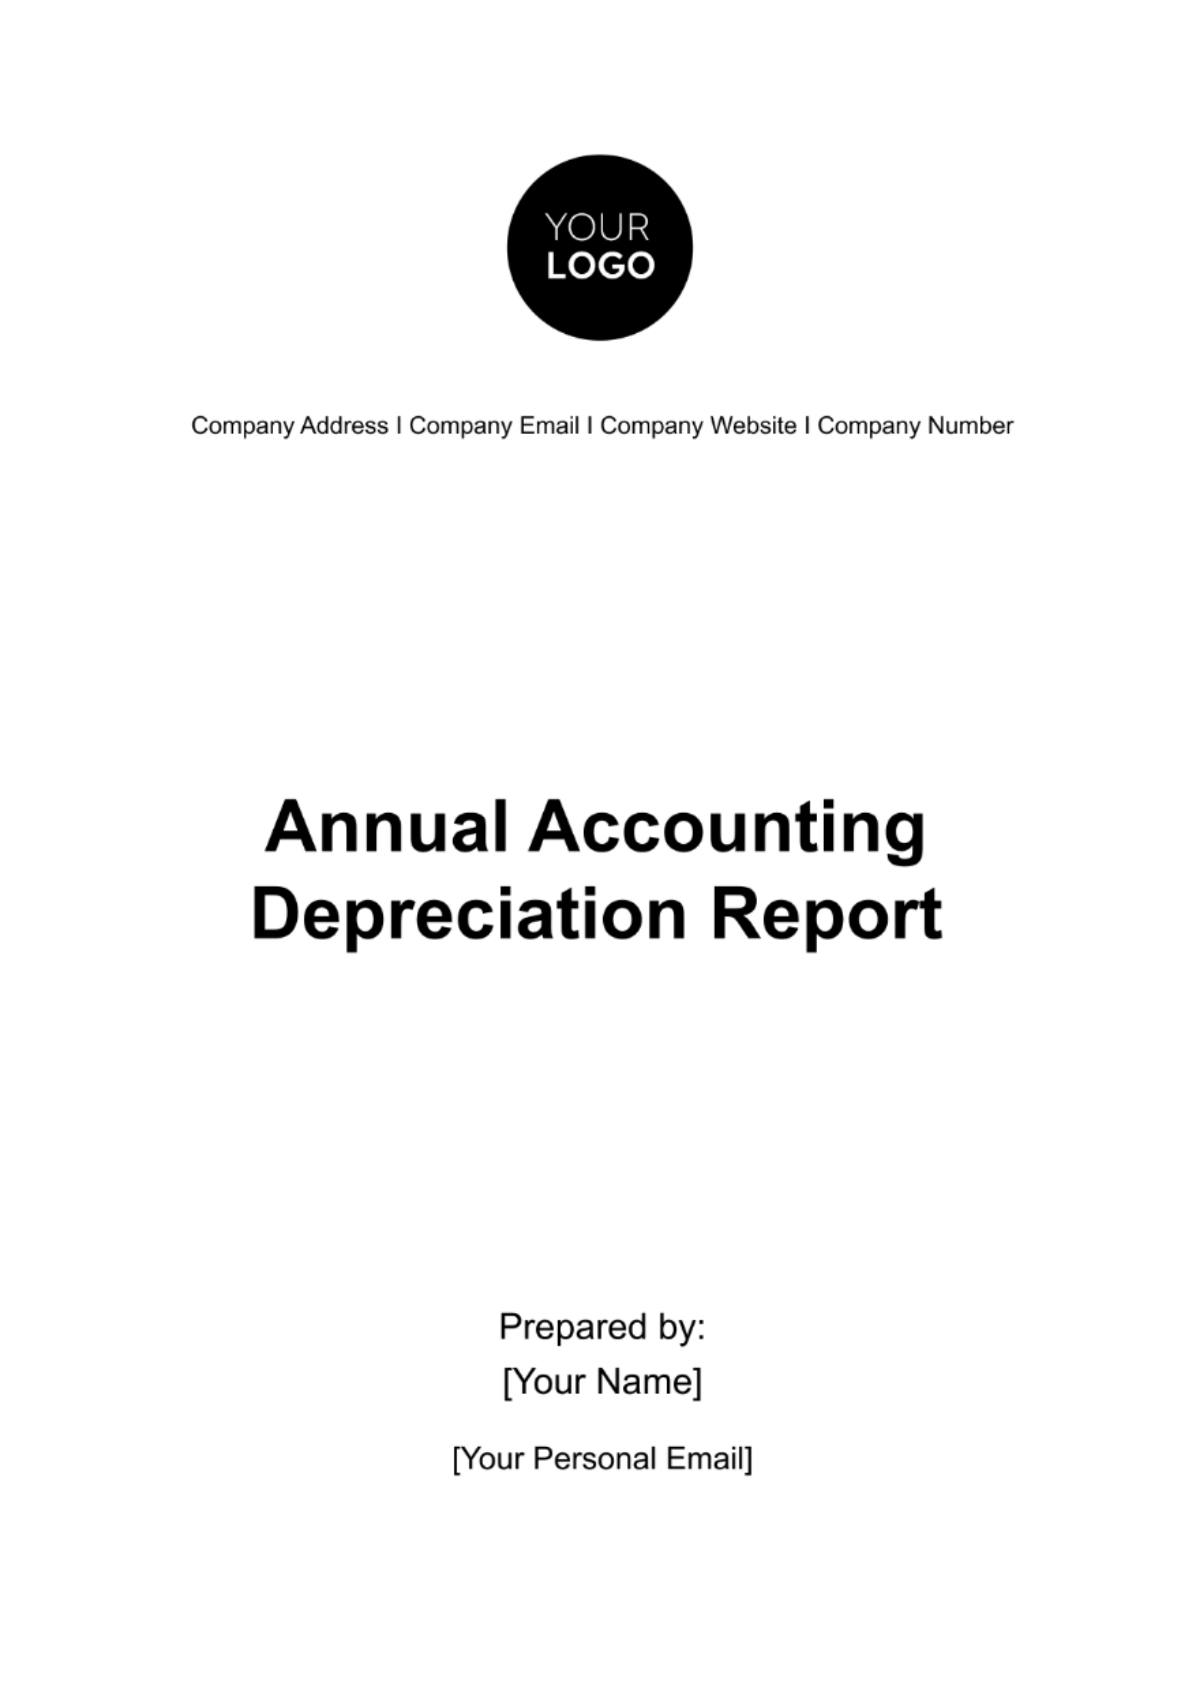 Free Annual Accounting Depreciation Report Template